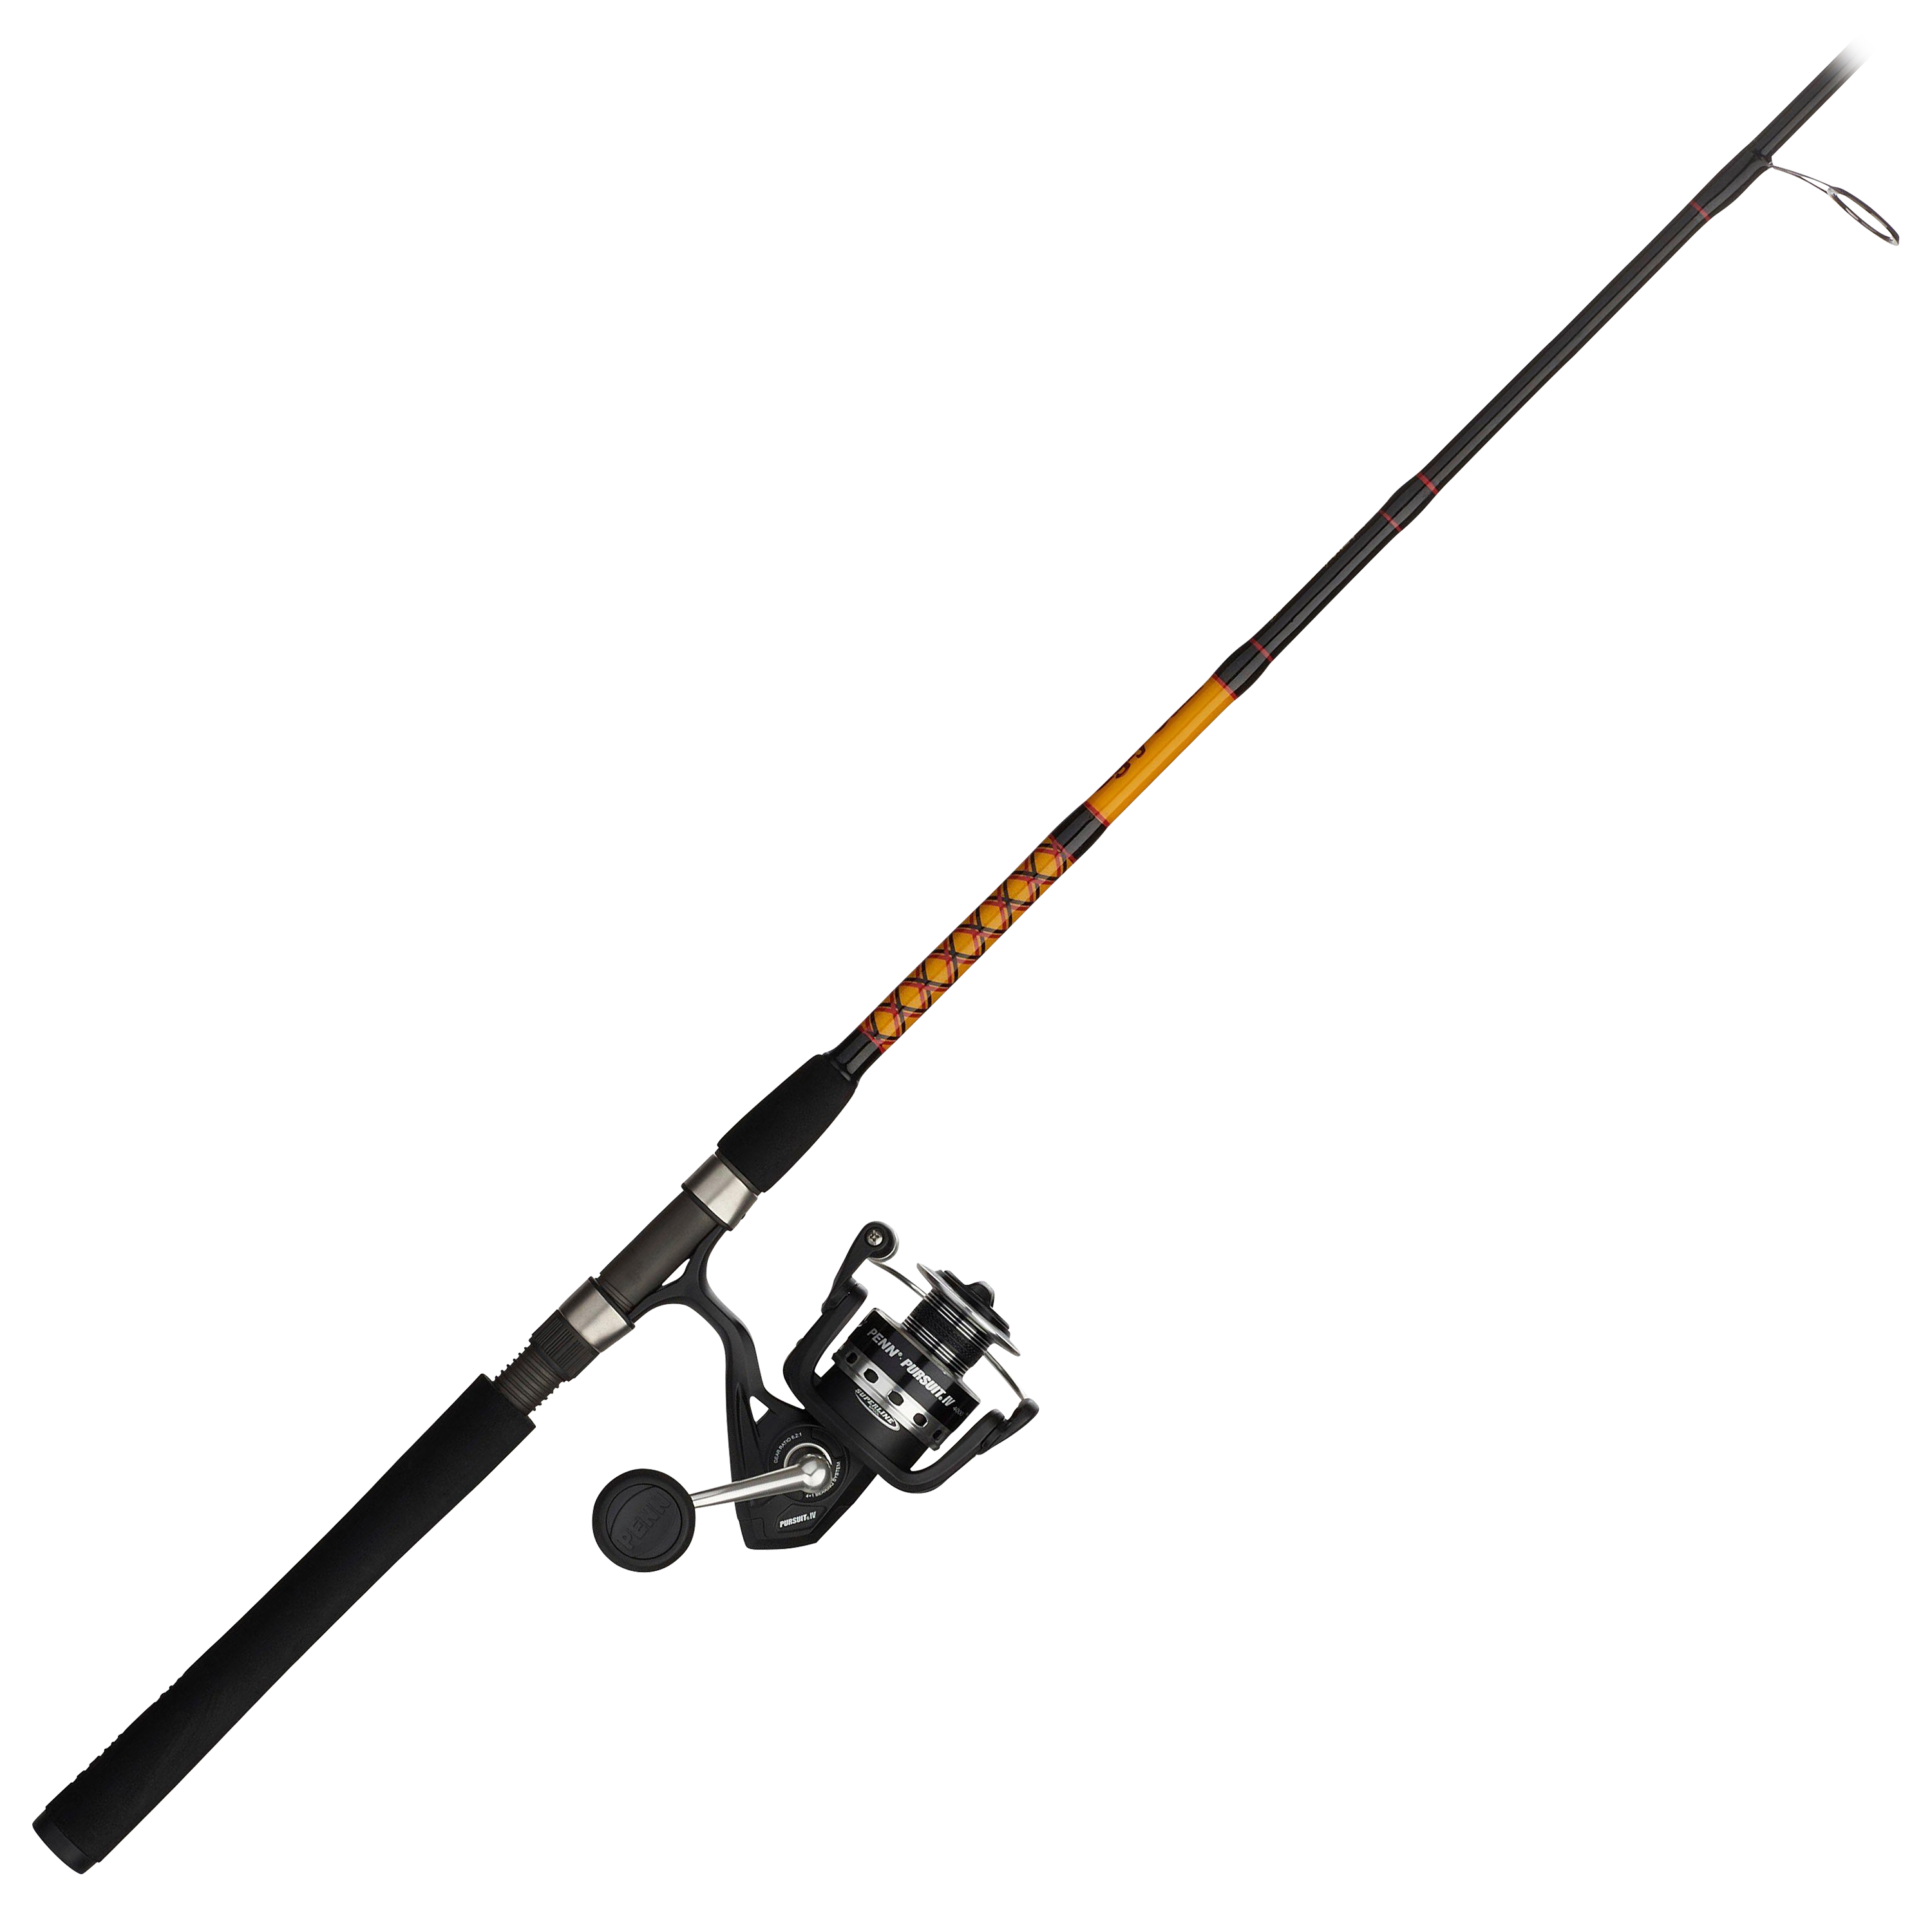 Offshore Angler Purple Tightline Spinning Rod and Reel Combo